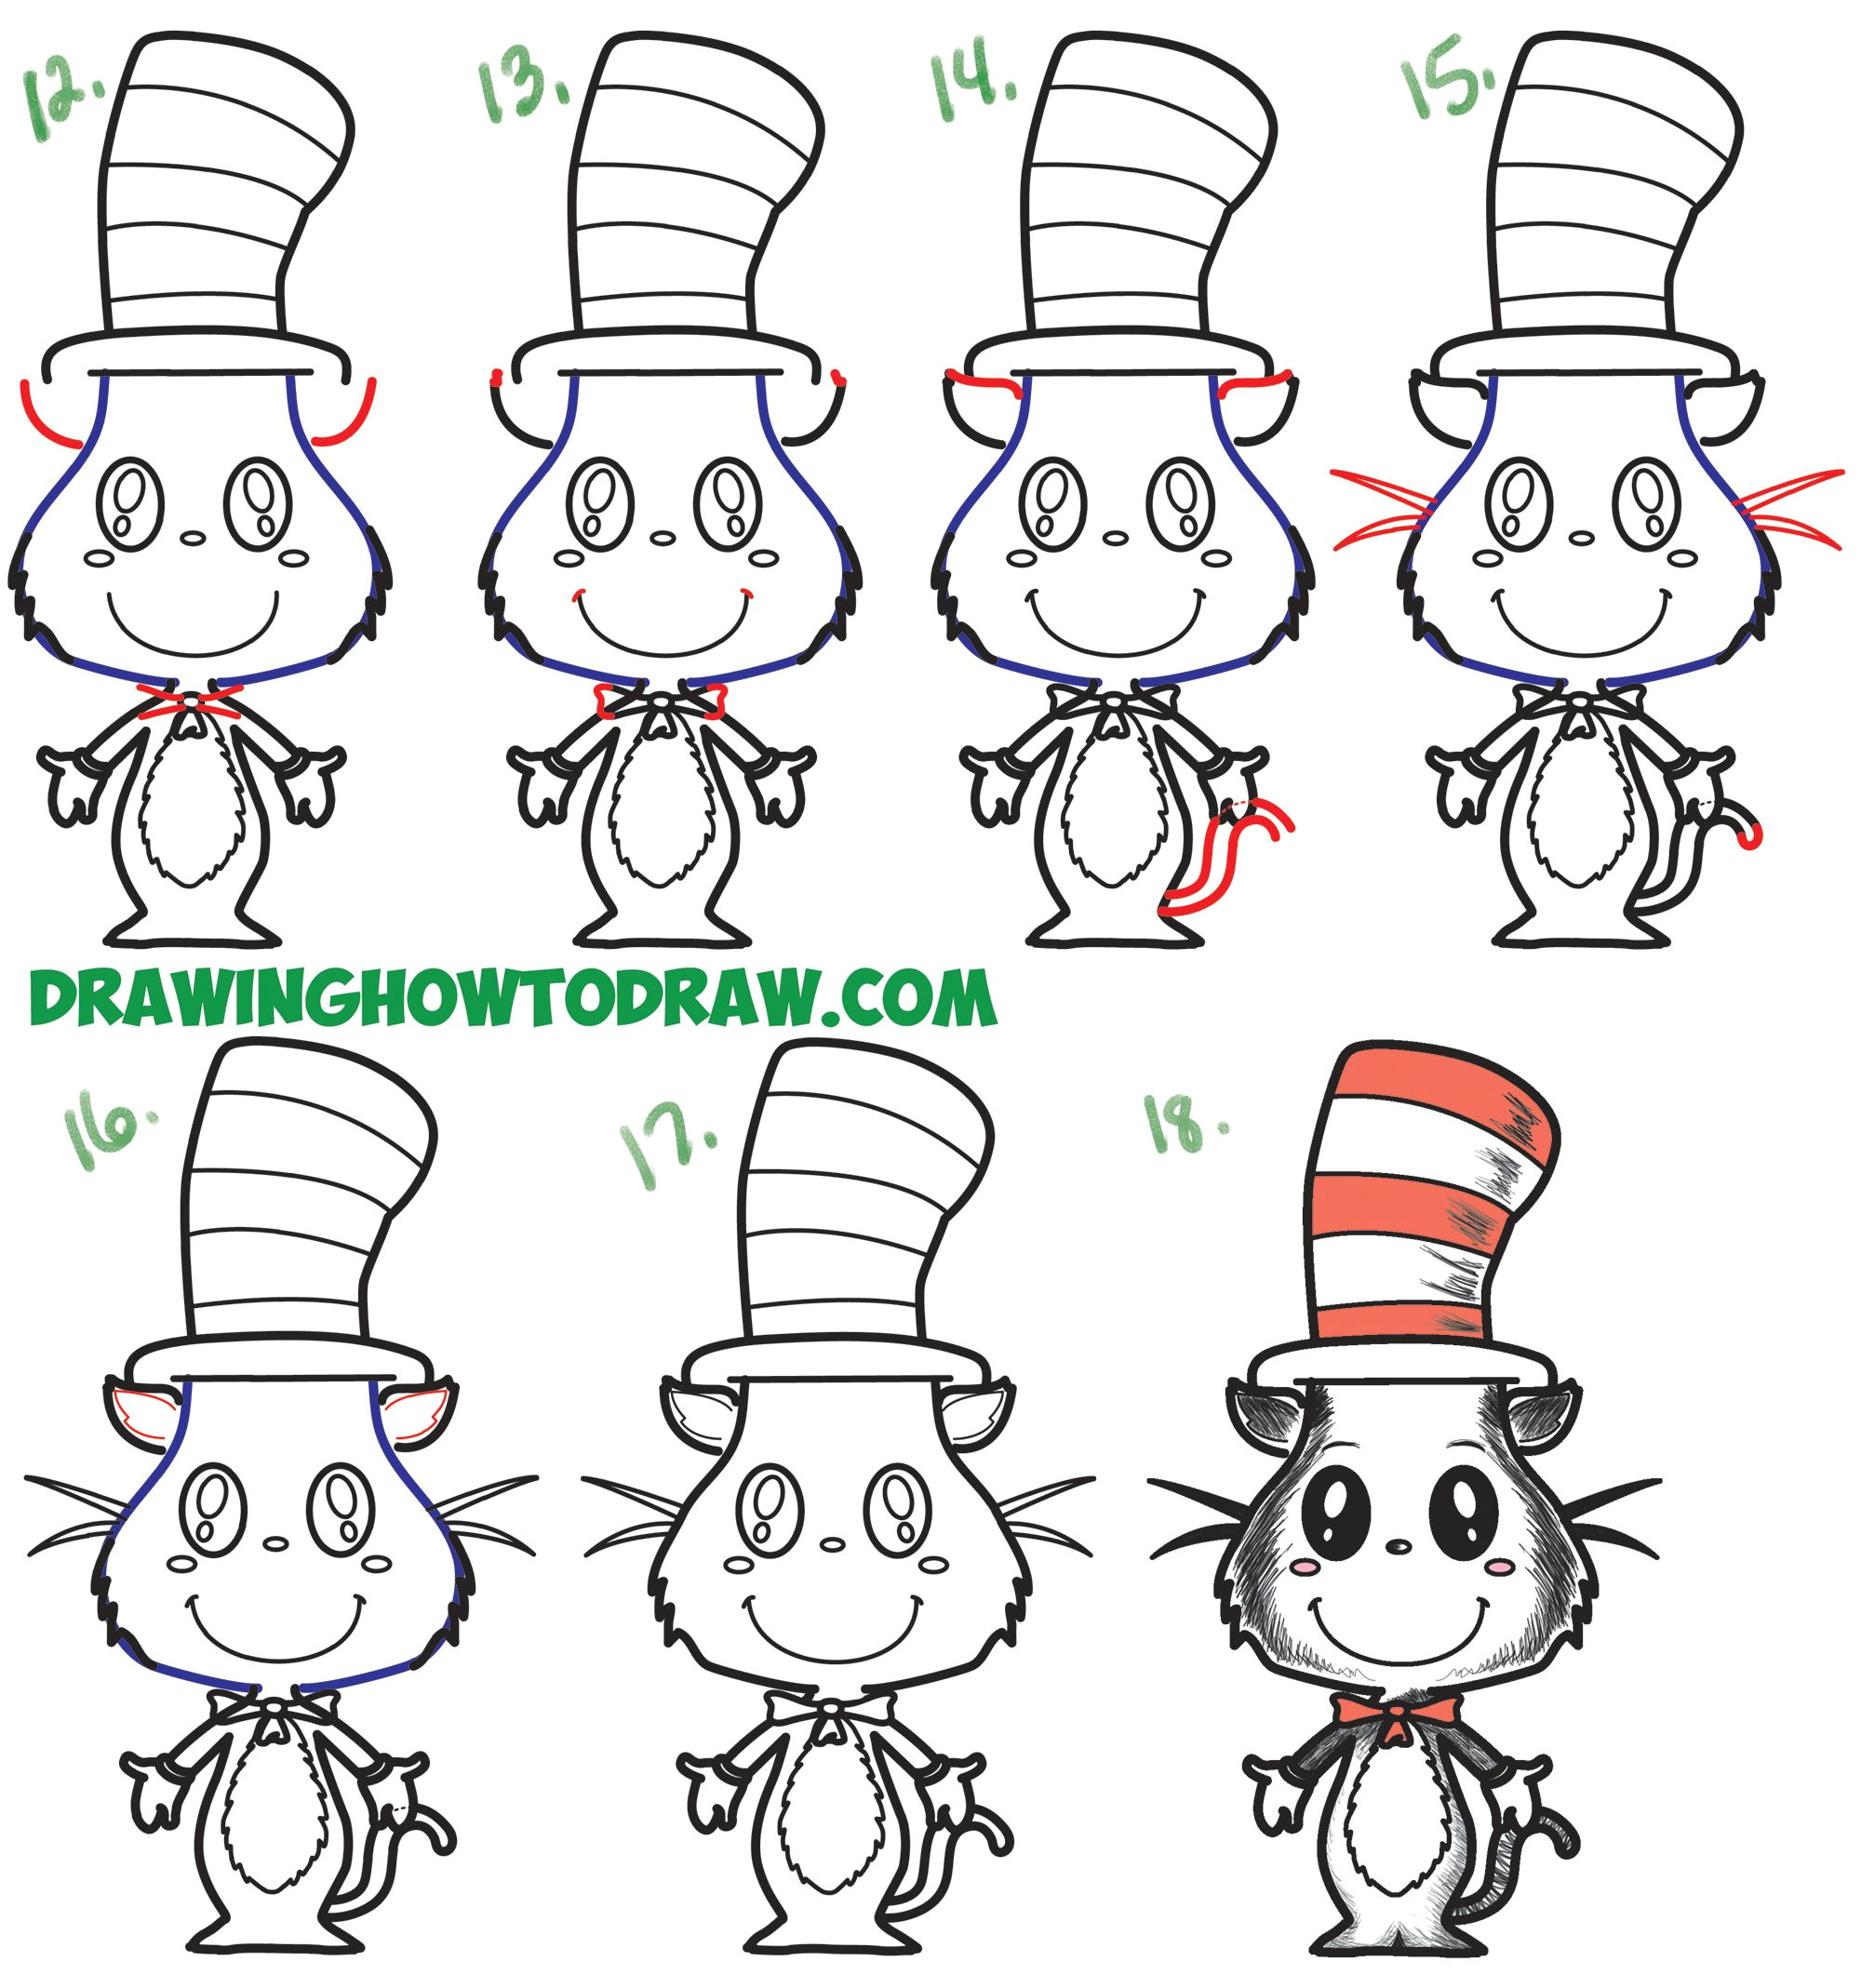 Guided Drawing Of A Cat How to Draw the Cat In the Hat Cute Kawaii Chibi Version Easy